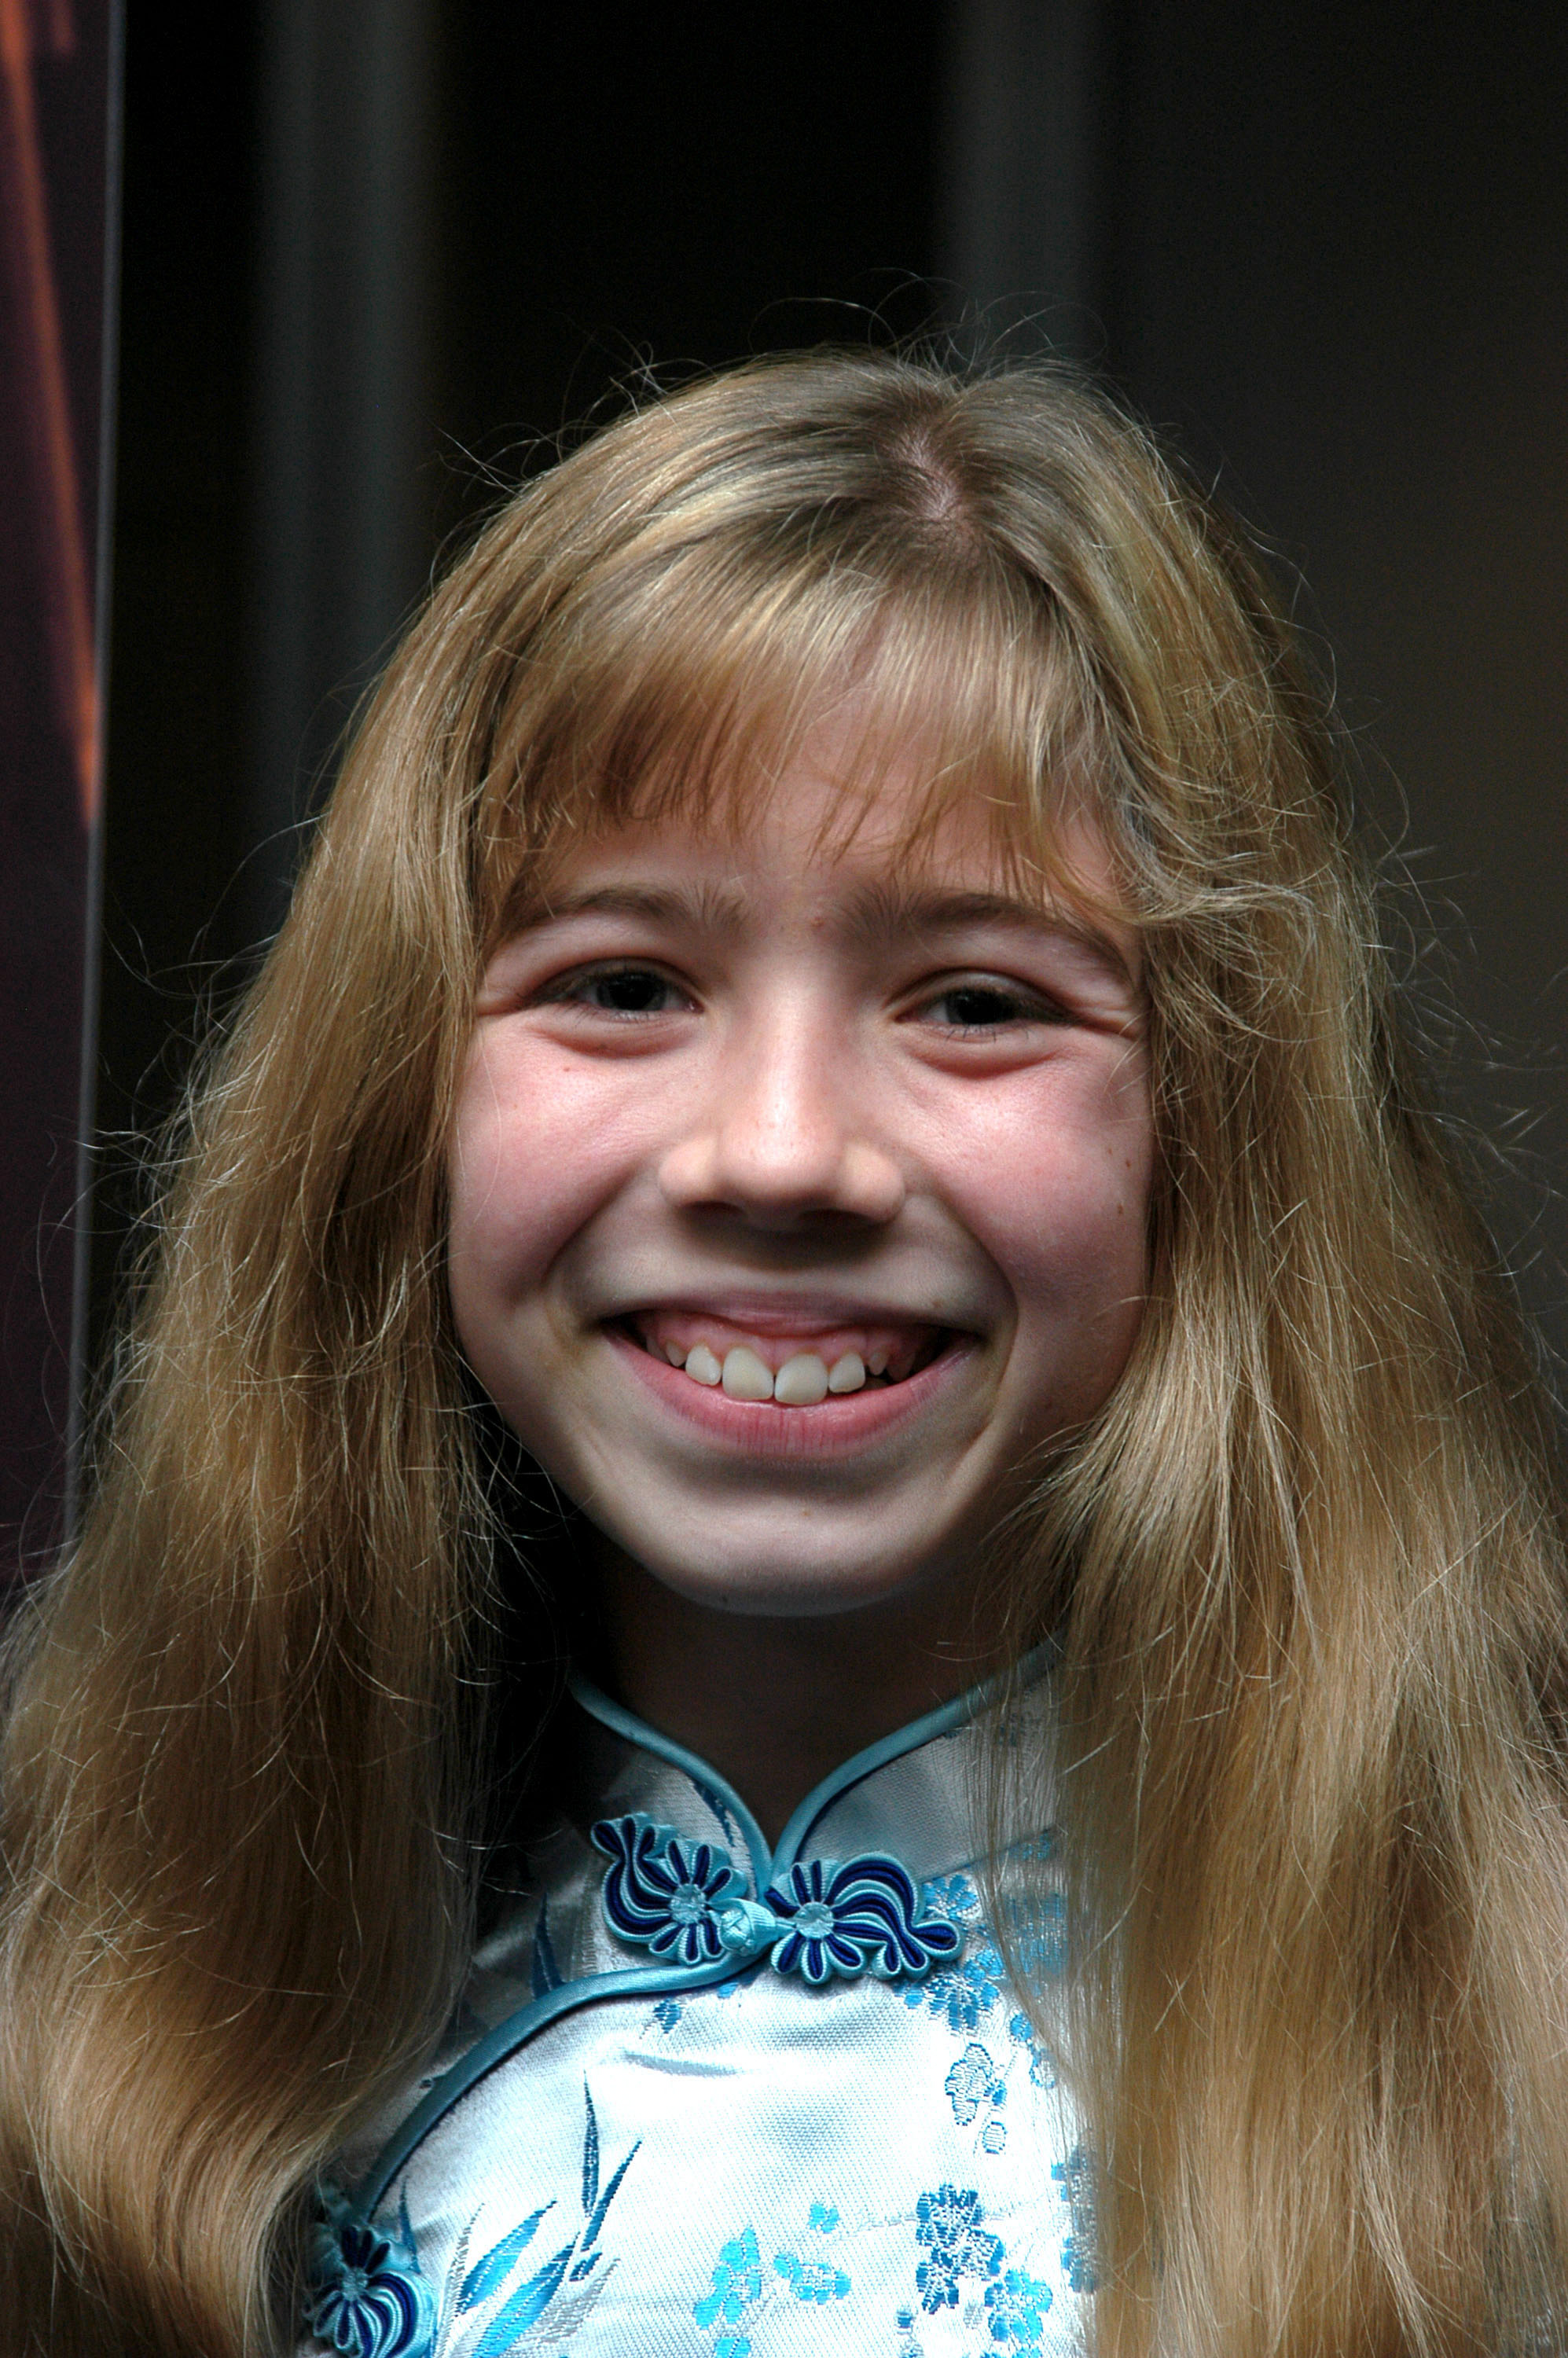 The child star at the private screening of "Breaking Dawn" on March 24, 2004 | Source: Getty Images